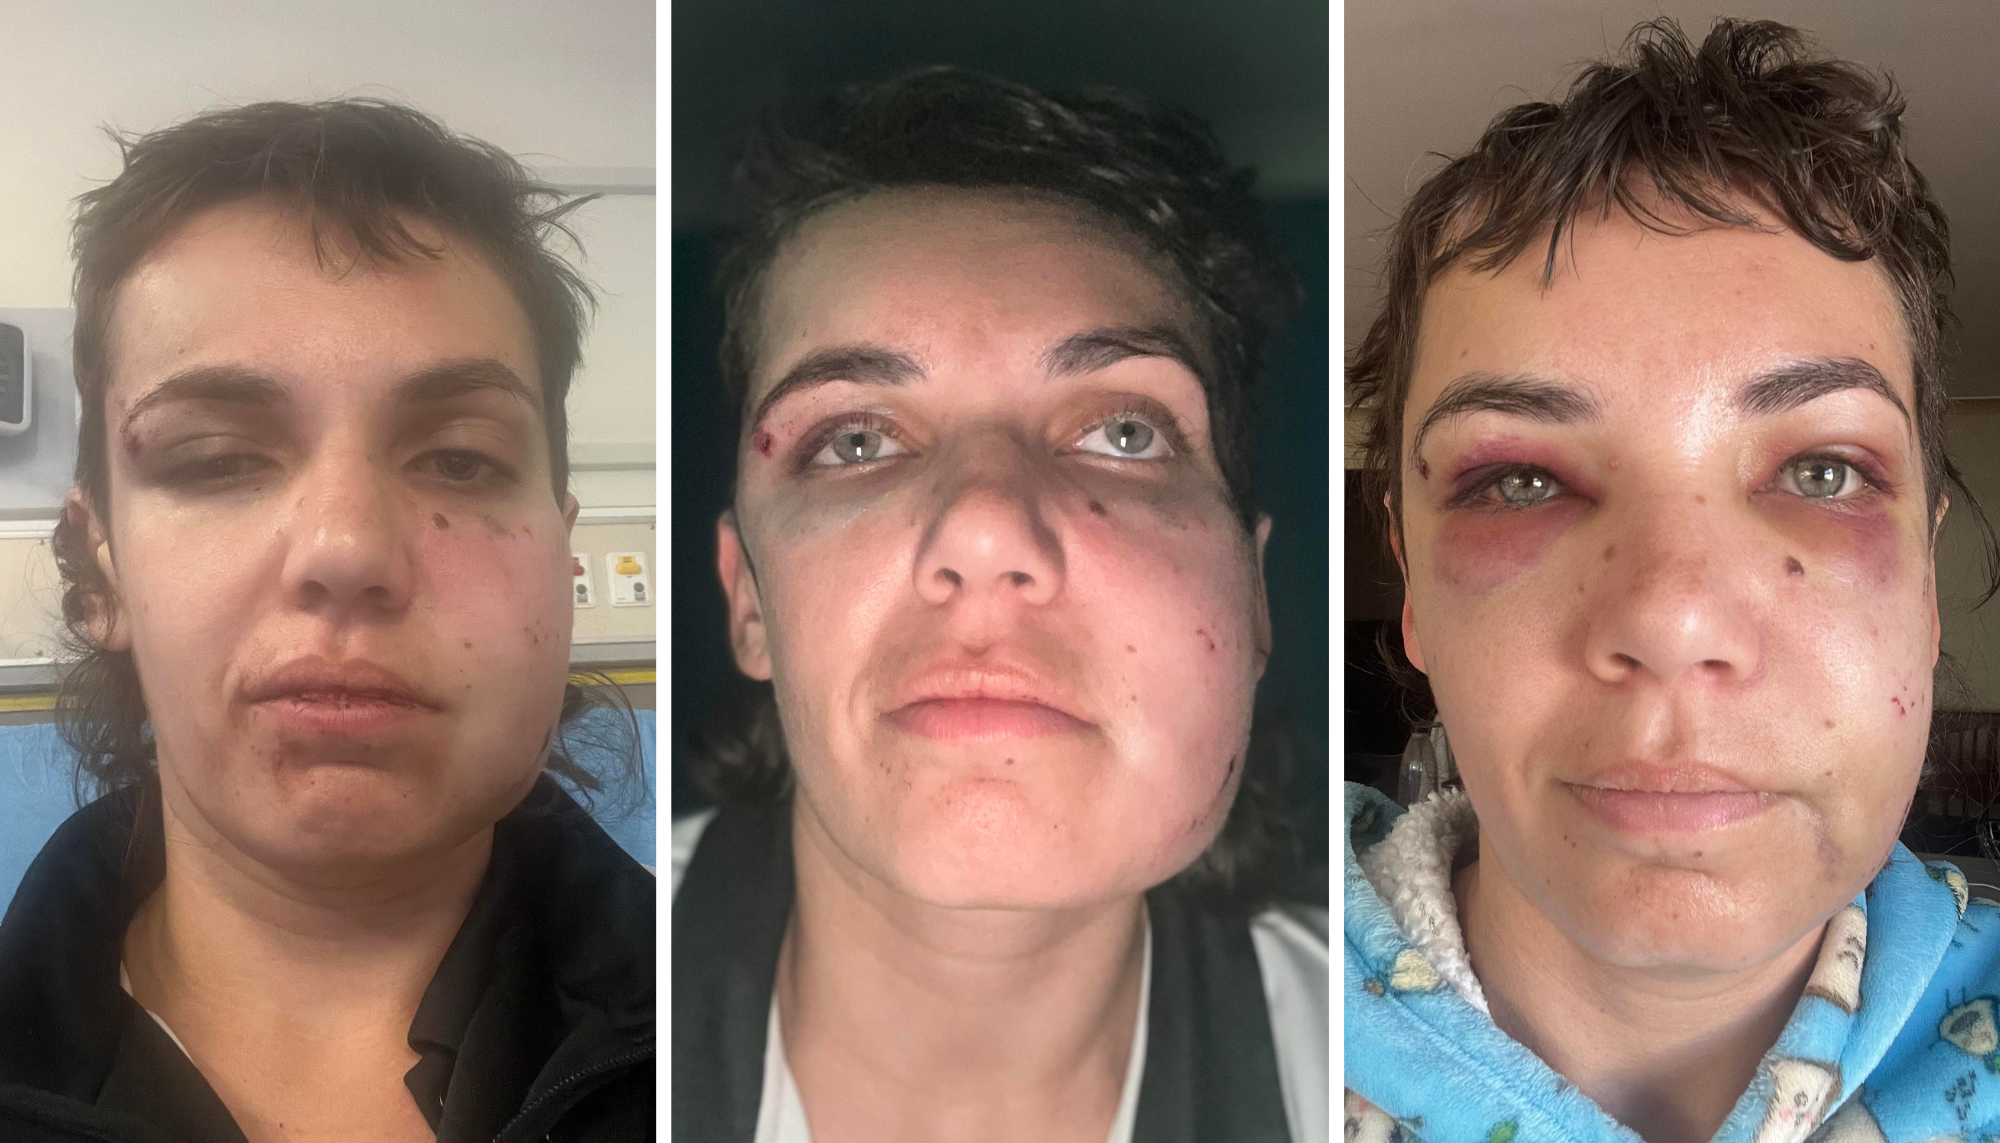 Three separate images detailing the injuries a woman suffered in a assault, showing black eyes and swelling.  